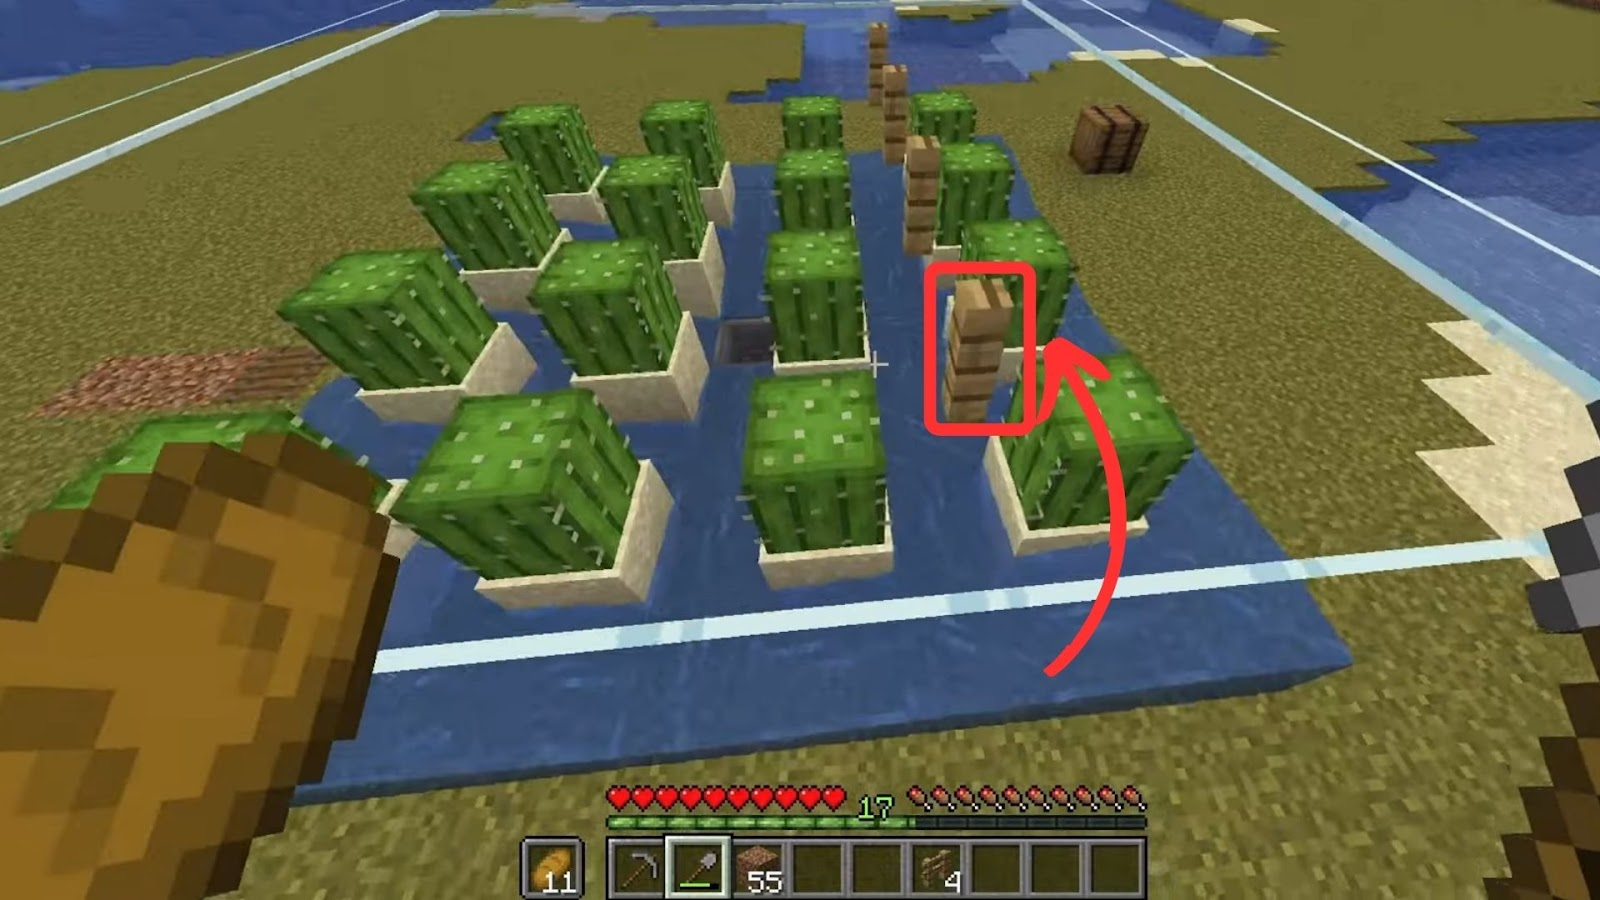 Grow Cactus in Minecraft Place Fences